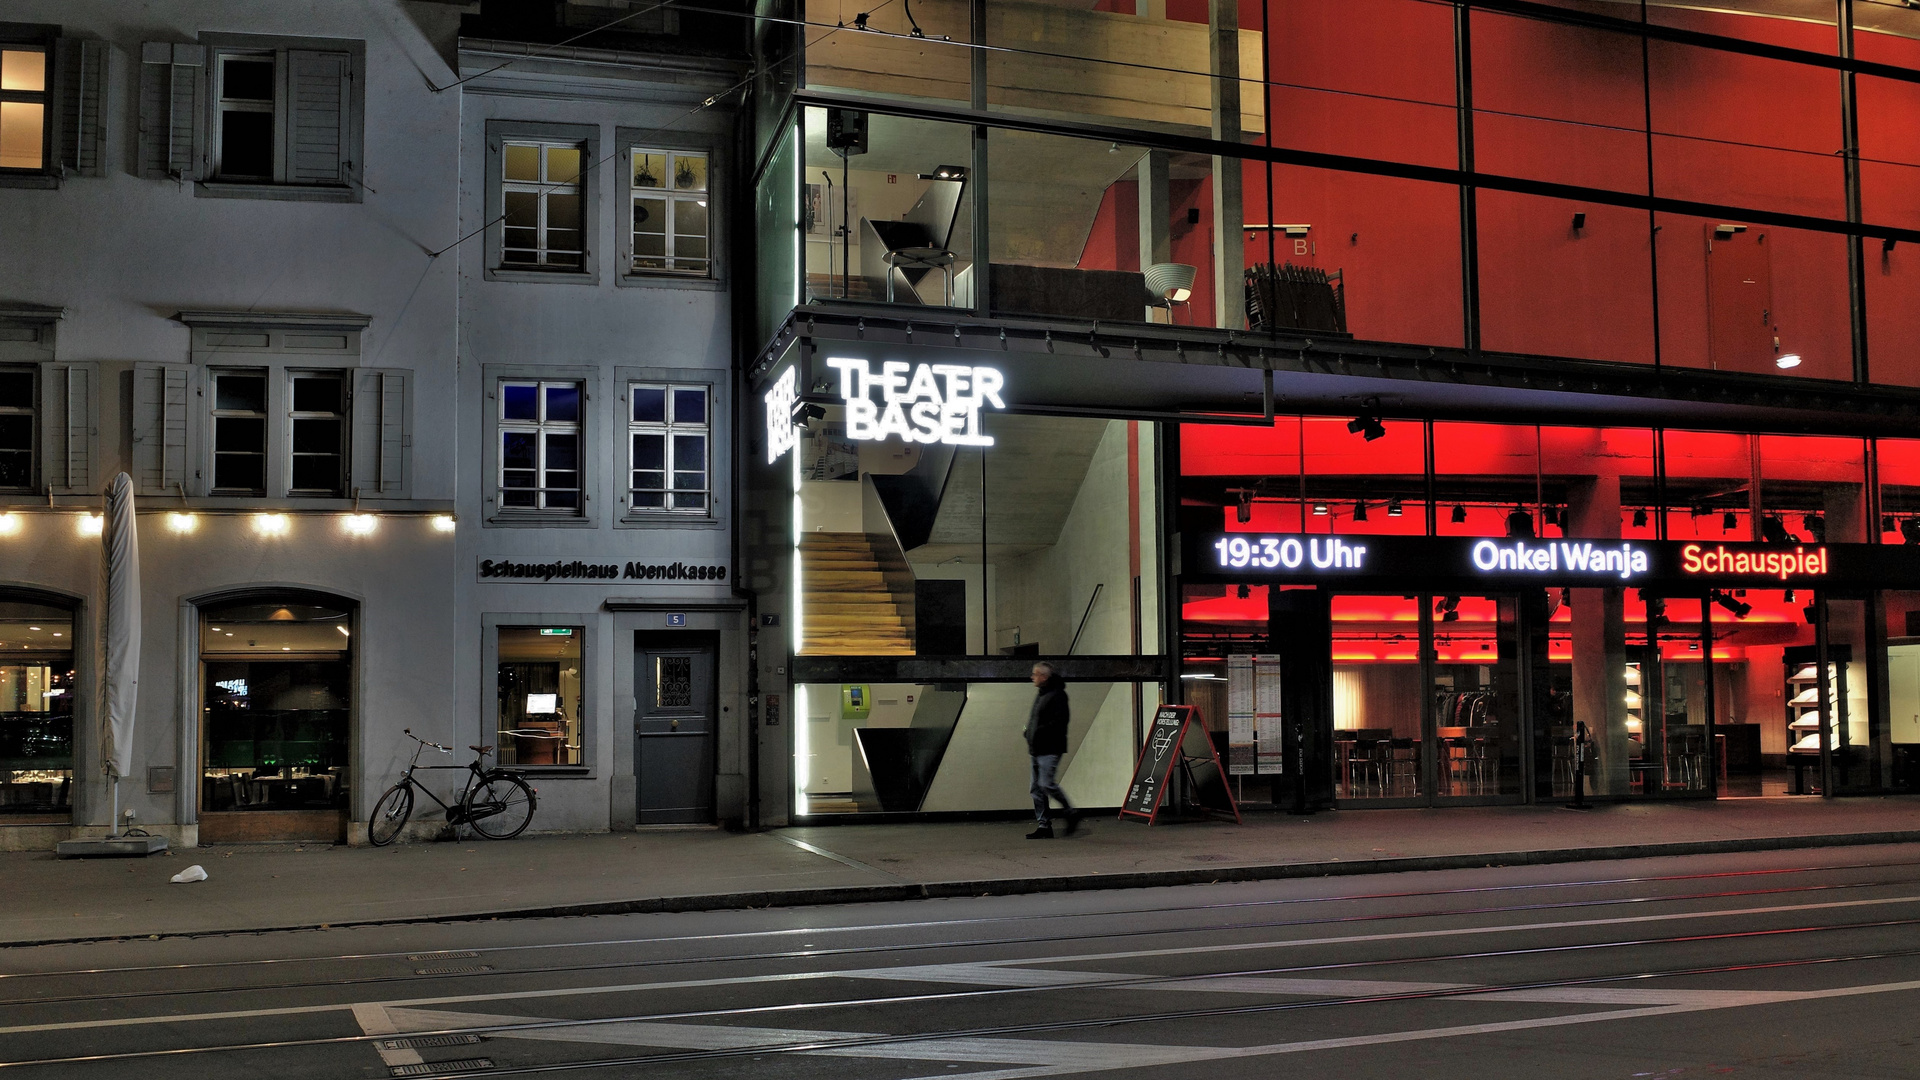 Theater Basel